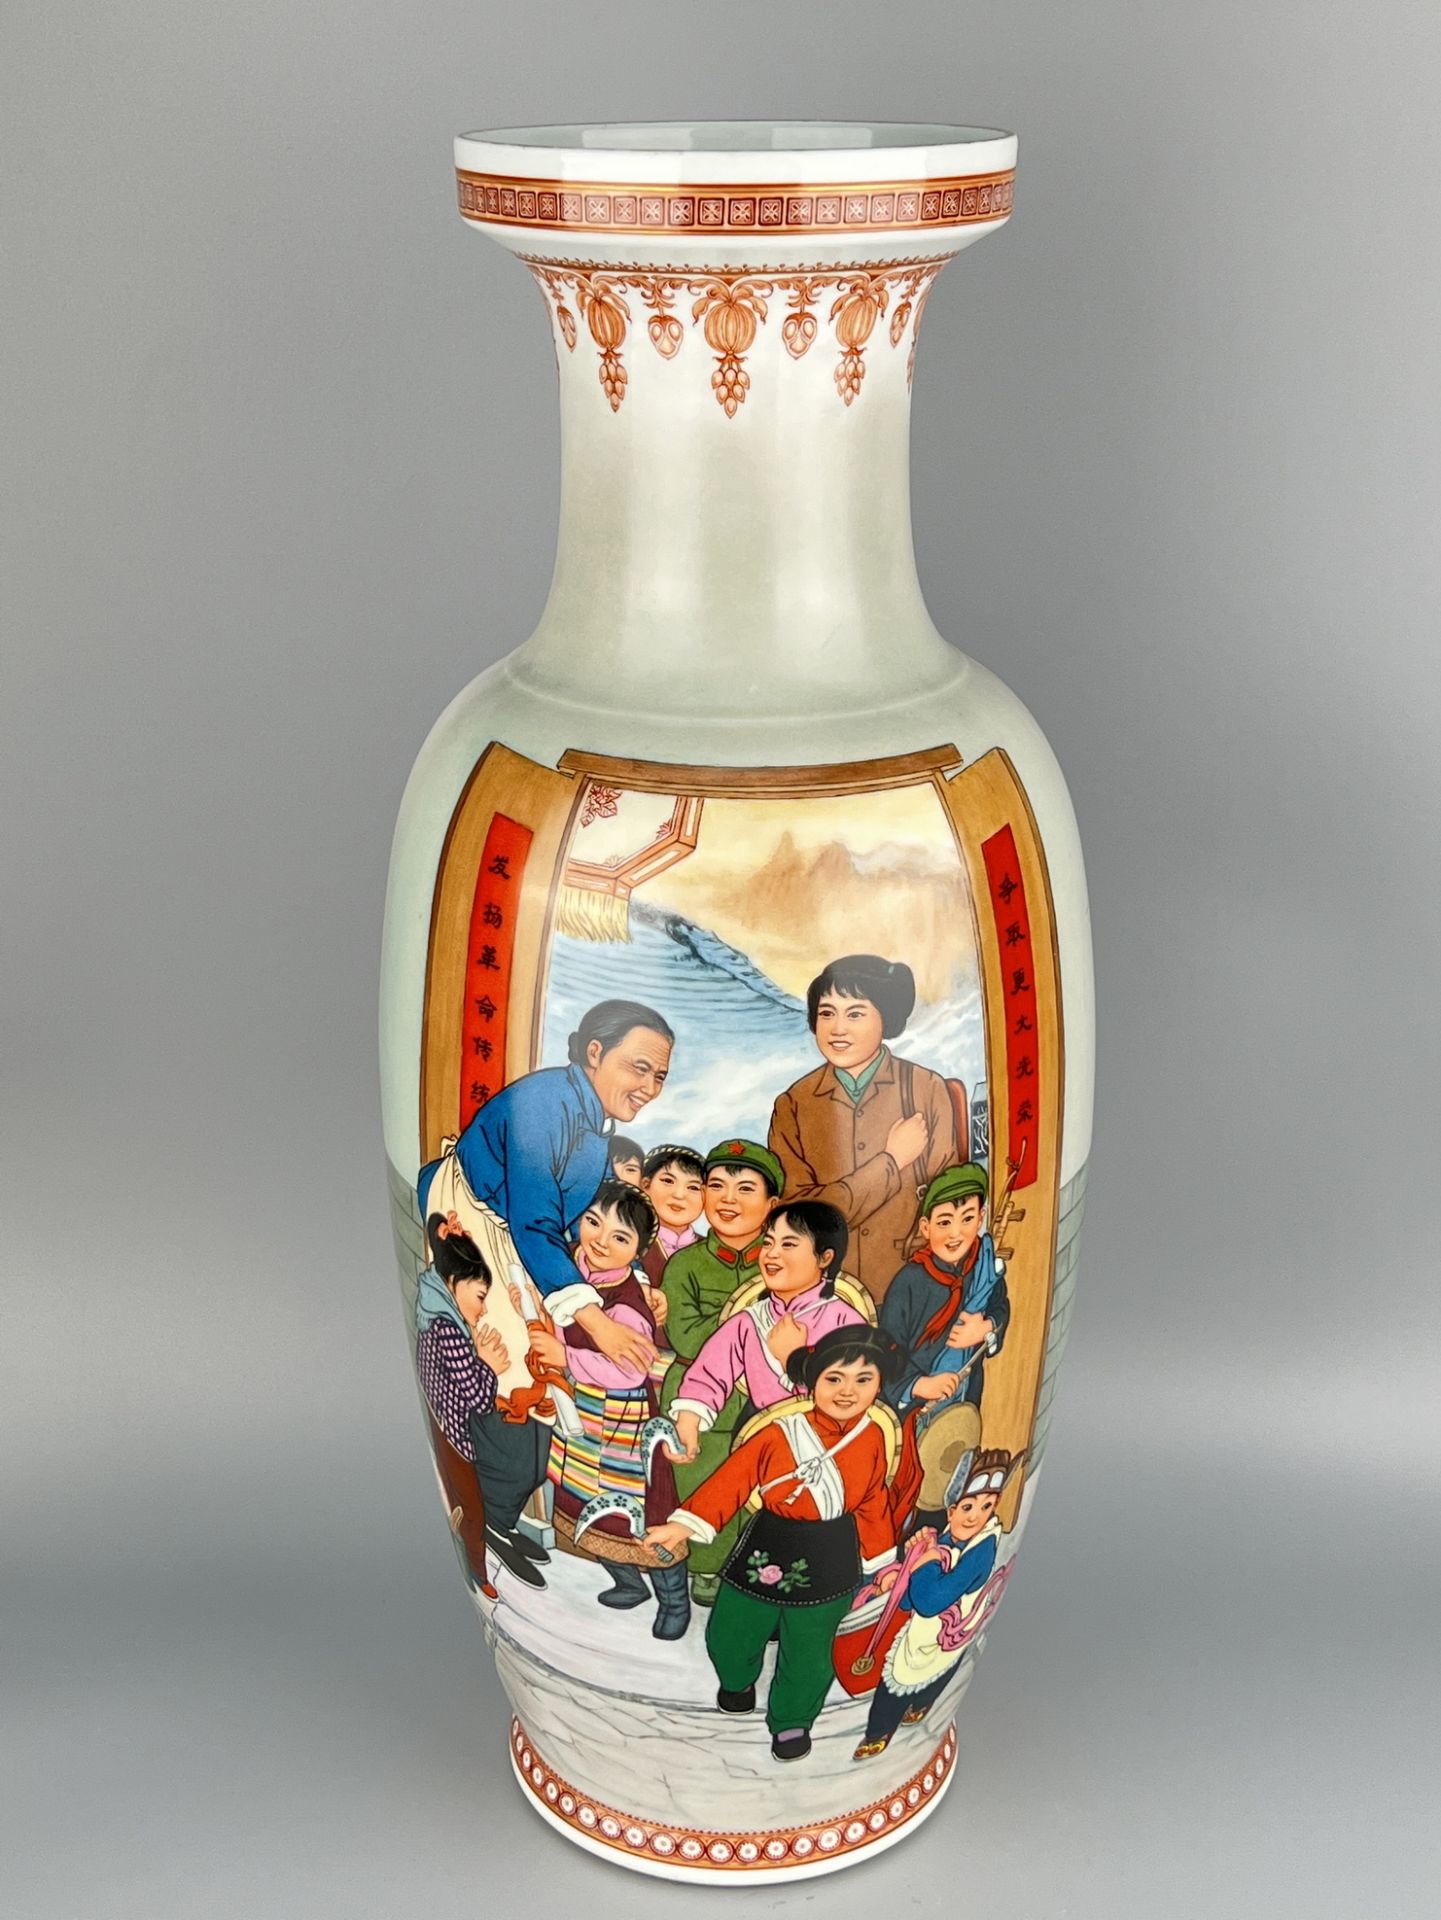 A Chinese Famille Rose vase, acquired in 1970's.